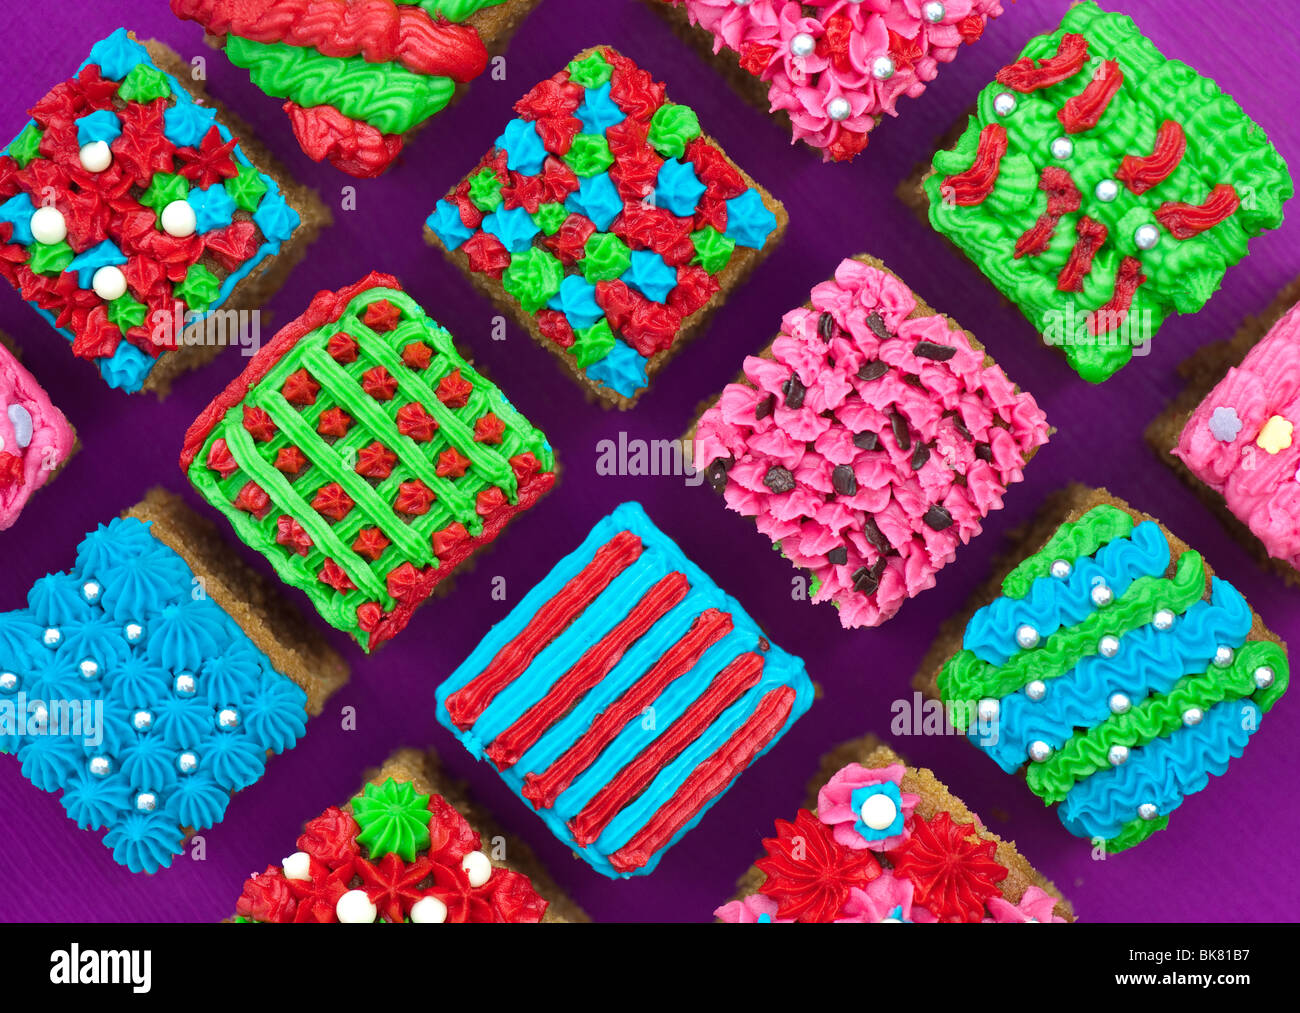 Homemade square individual iced cakes in a grid pattern. Flat lay photography from above Stock Photo